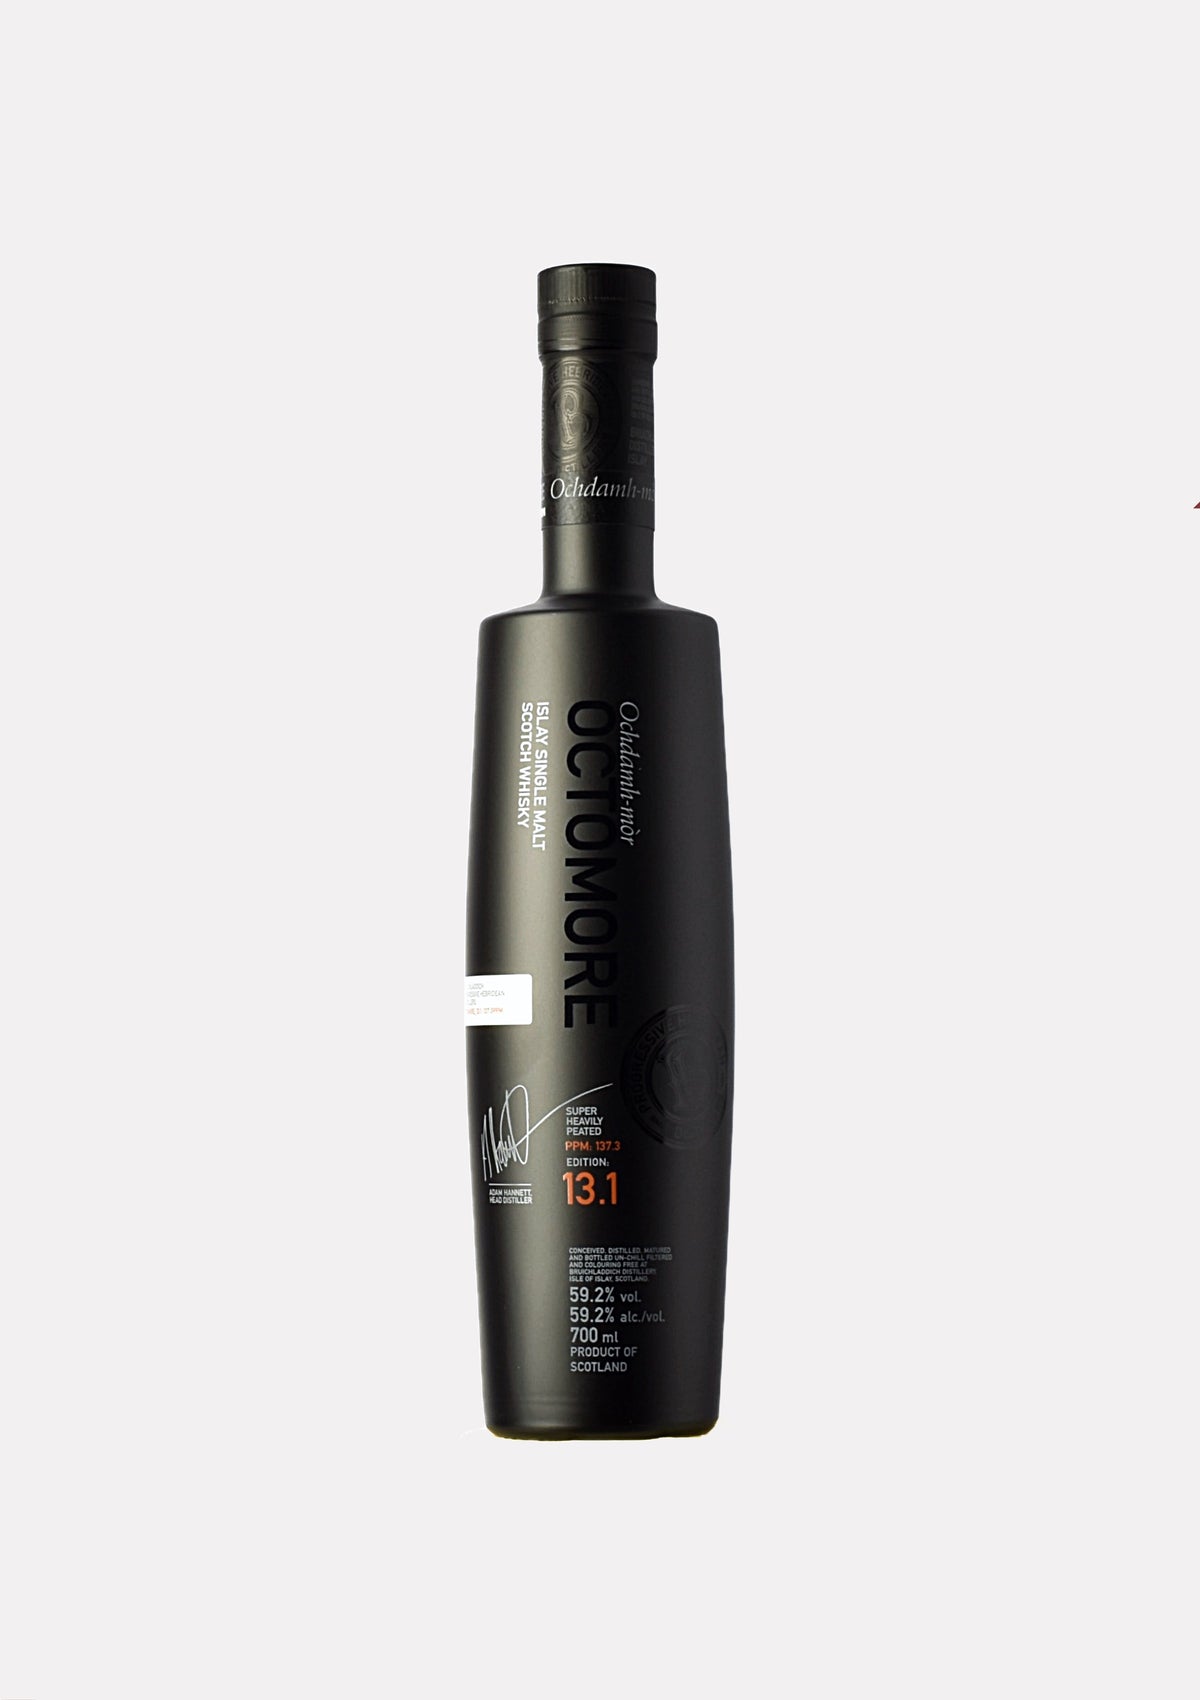 Octomore 13.1 137.3 ppm